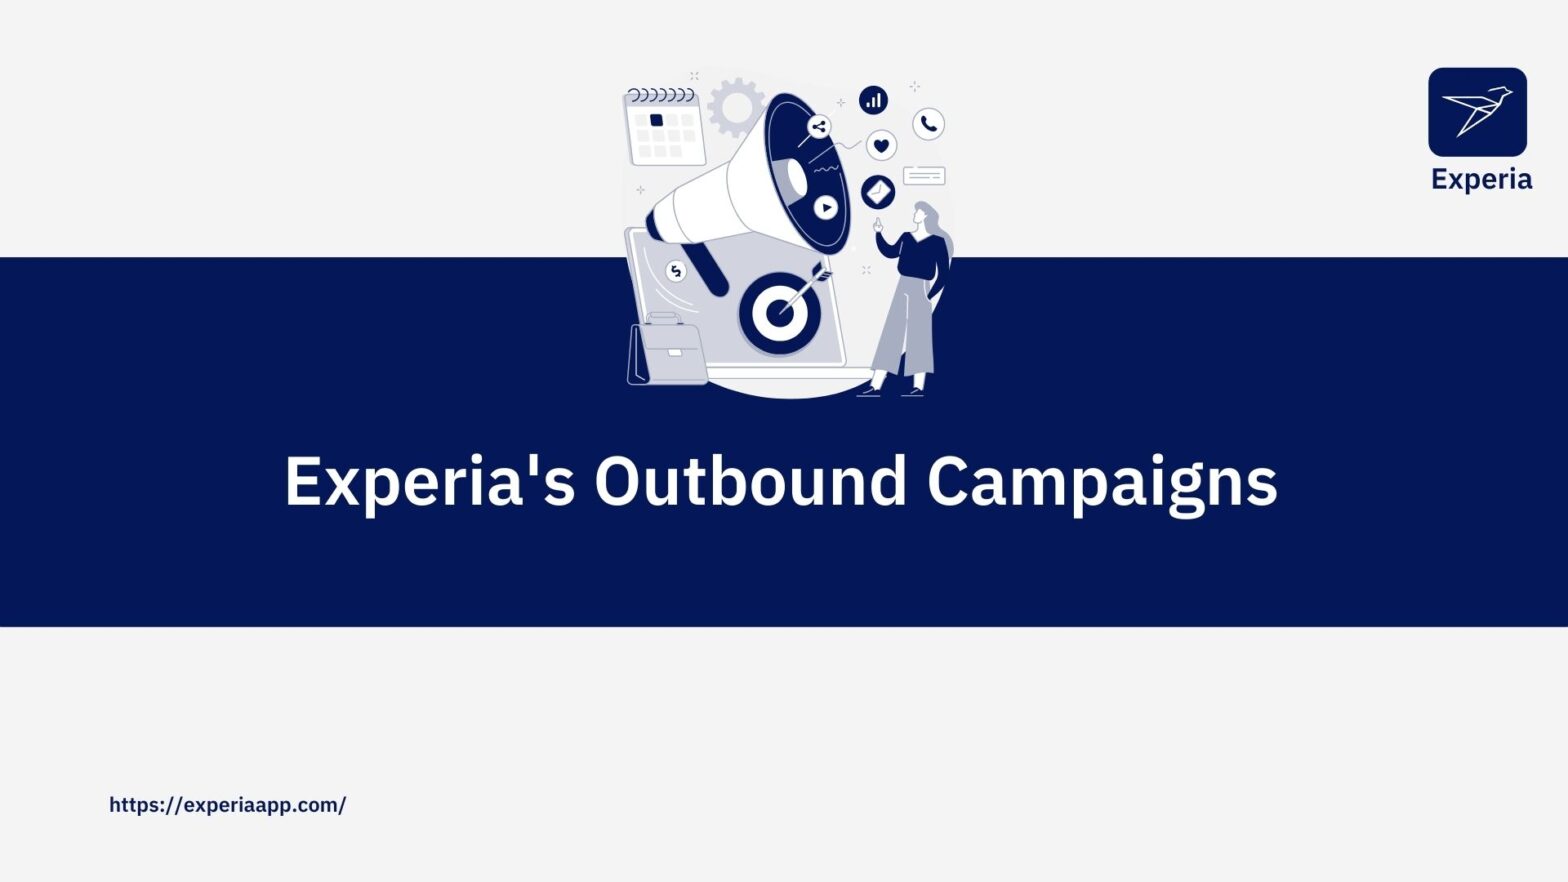 Experia's Outbound Campaigns